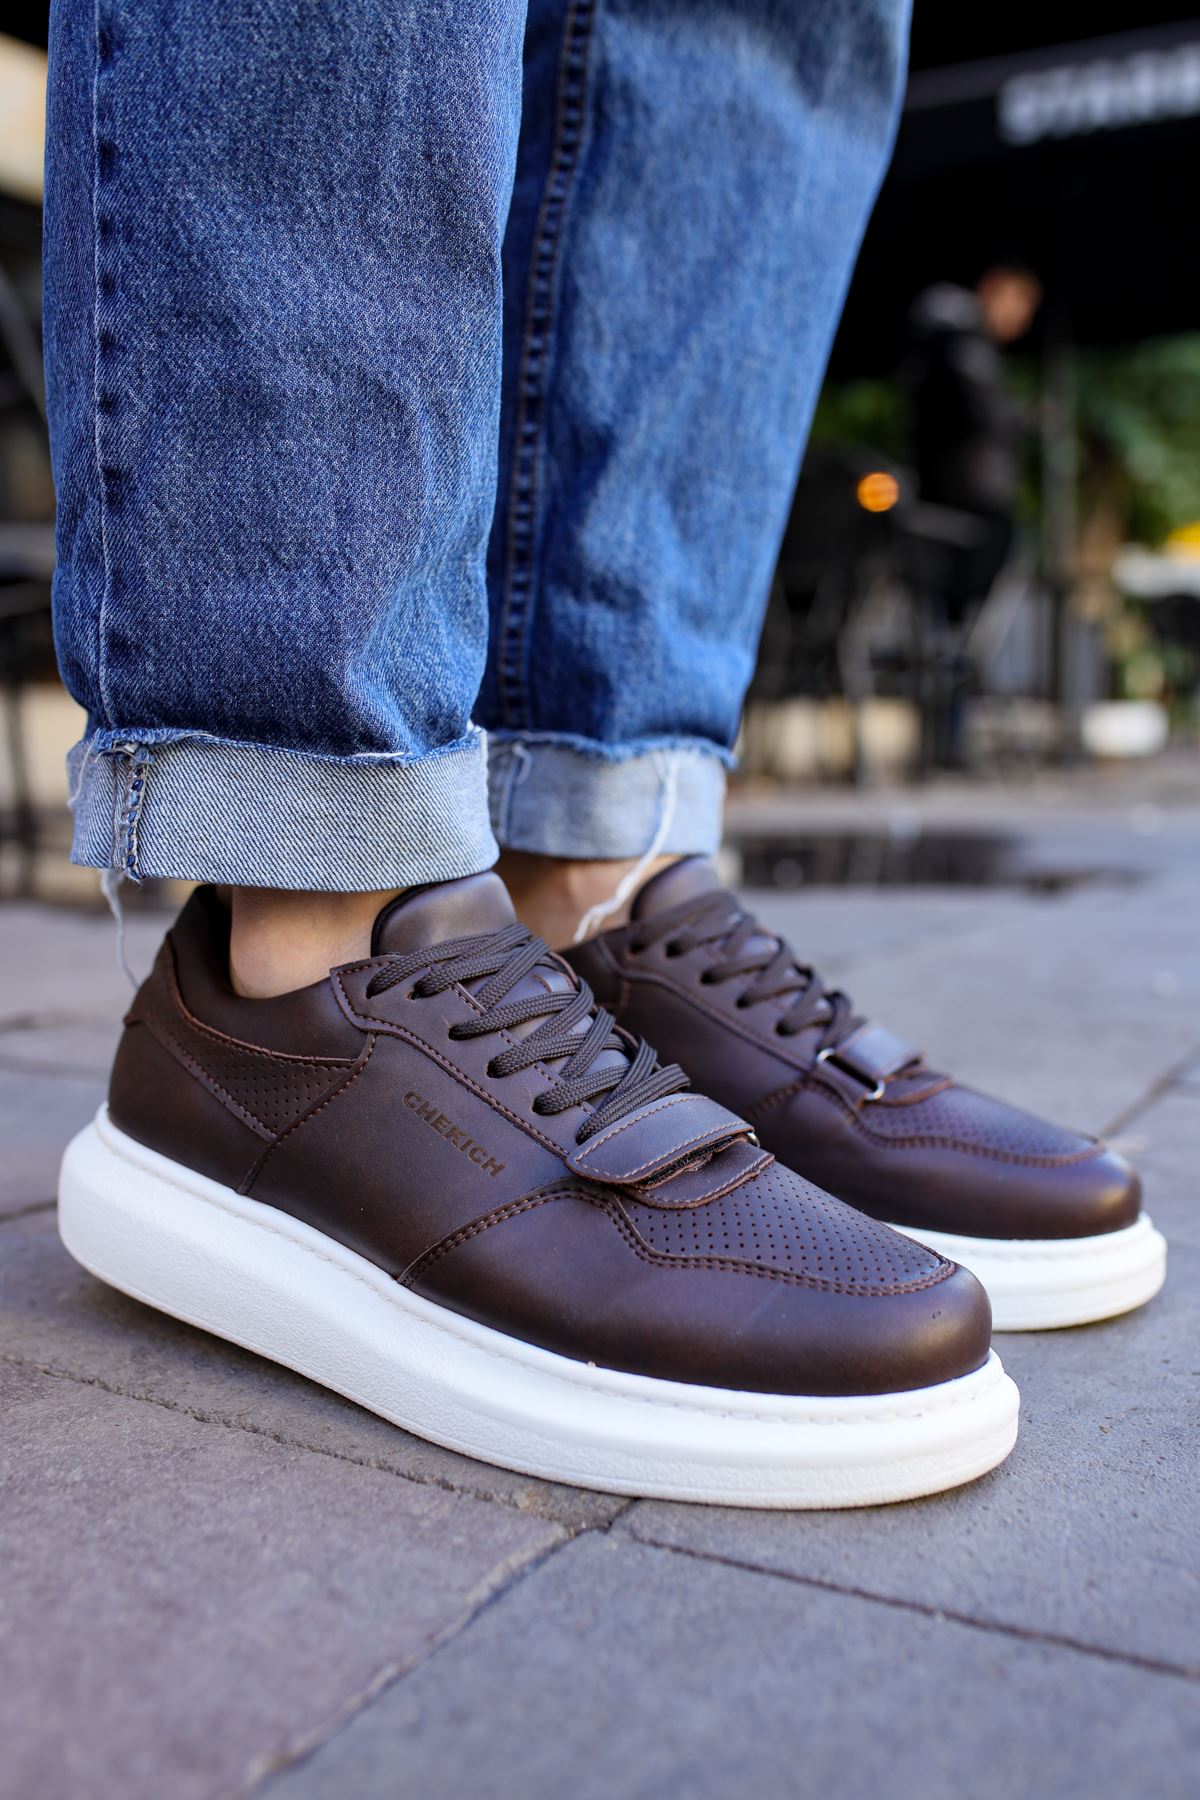 CH073 Men's Unisex Brown Lace-Up Casual Sneaker Sports Shoes - STREETMODE ™